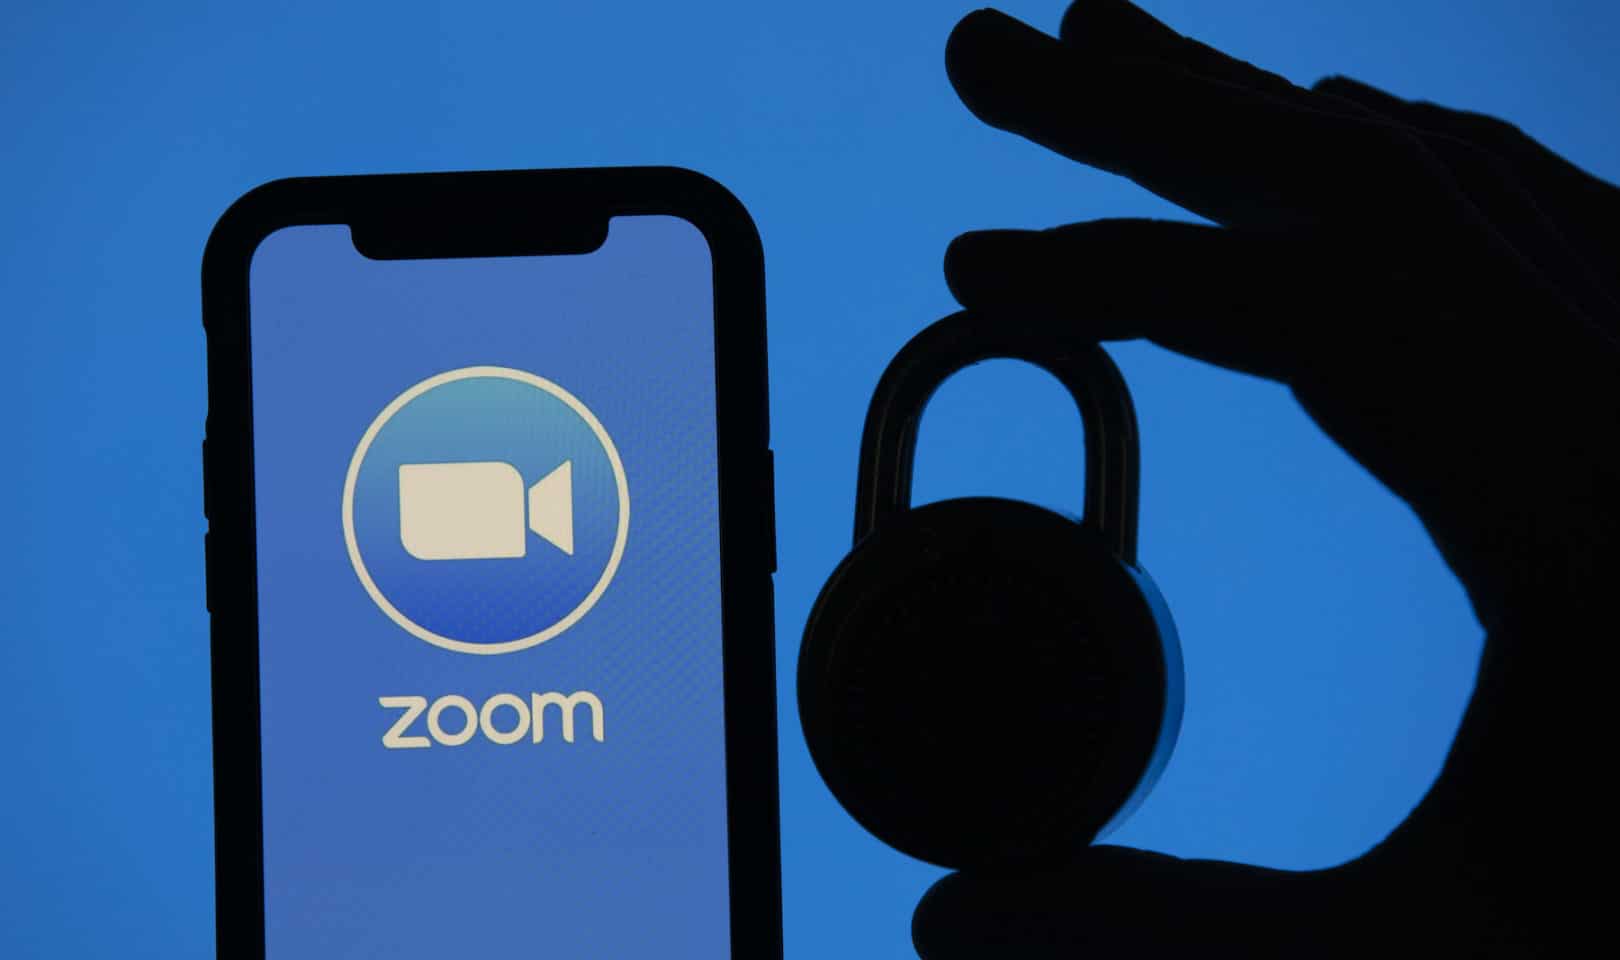 flaws deleted zoom keybase app chat